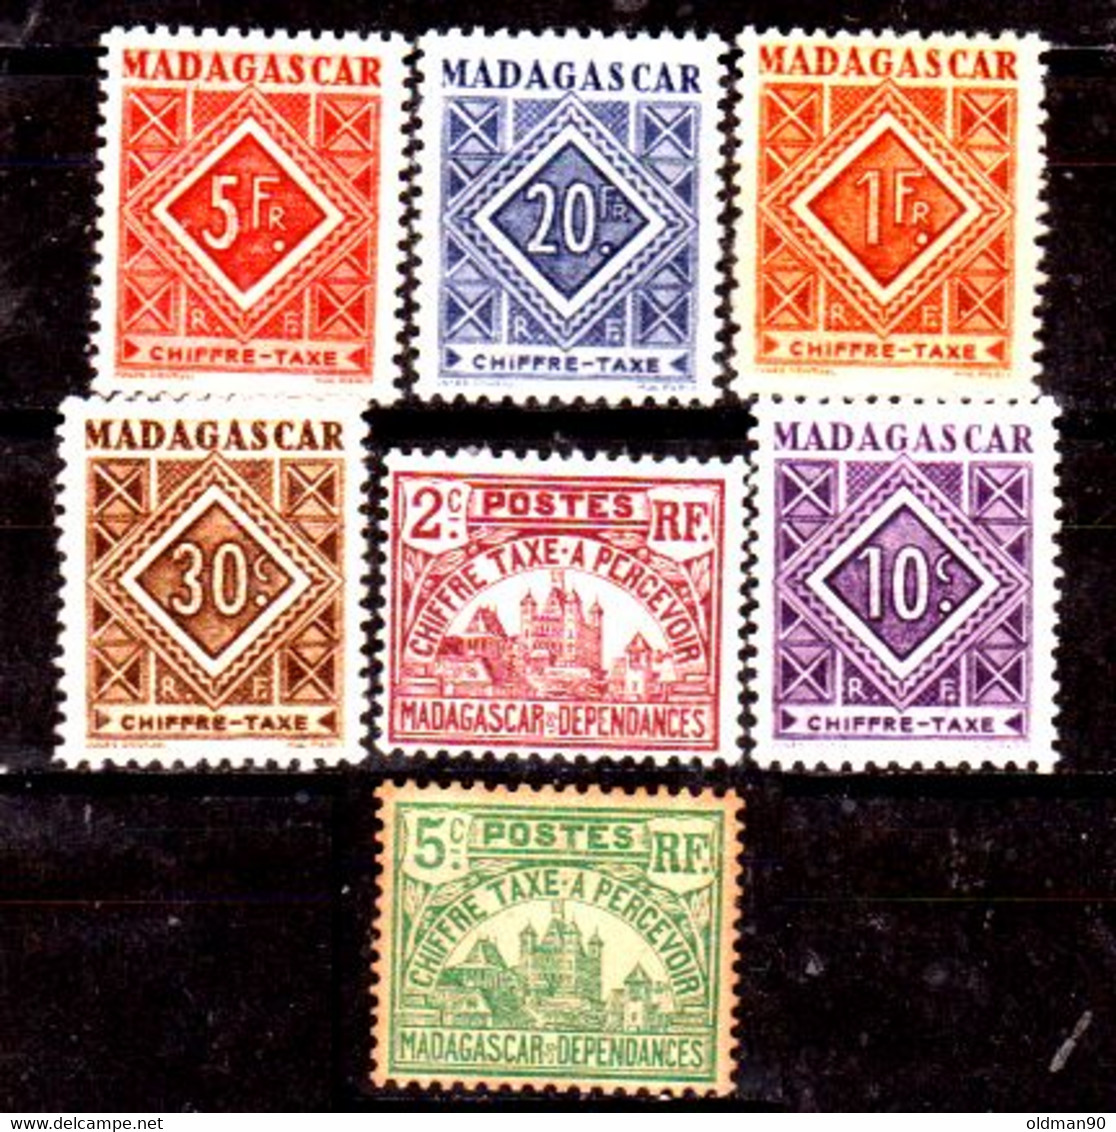 Madagascar -137- POSTAGE DUE STAMPS, Issued By 1908-1962 - Quality In Your Opinion. - Impuestos